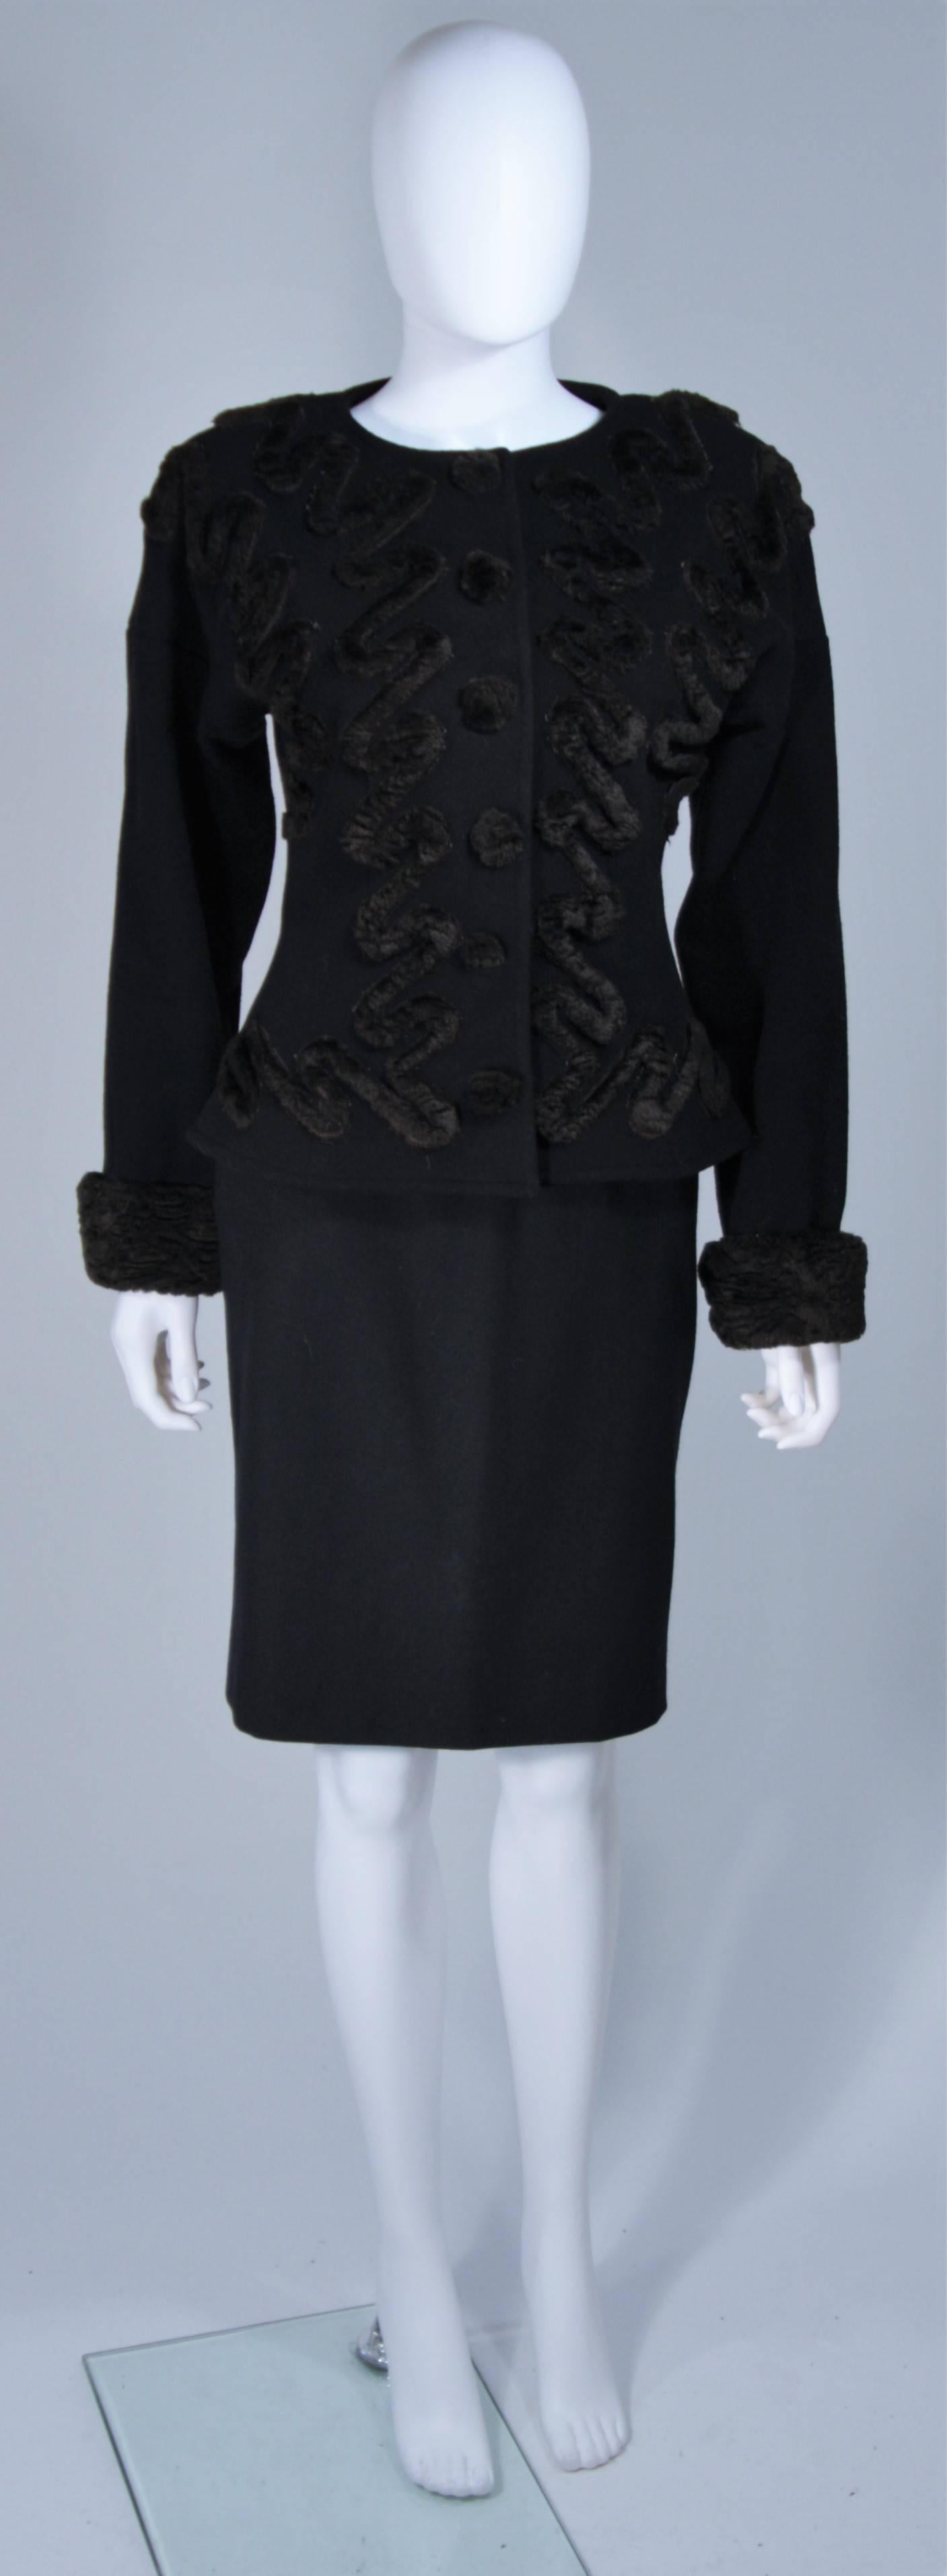  This Fendi skirt suit is composed of a black lana wool and features a brown faux fur applique in a swirl pattern. The jacket features center front button closures and the classic pencil style skirt has a zipper closure. In excellent vintage